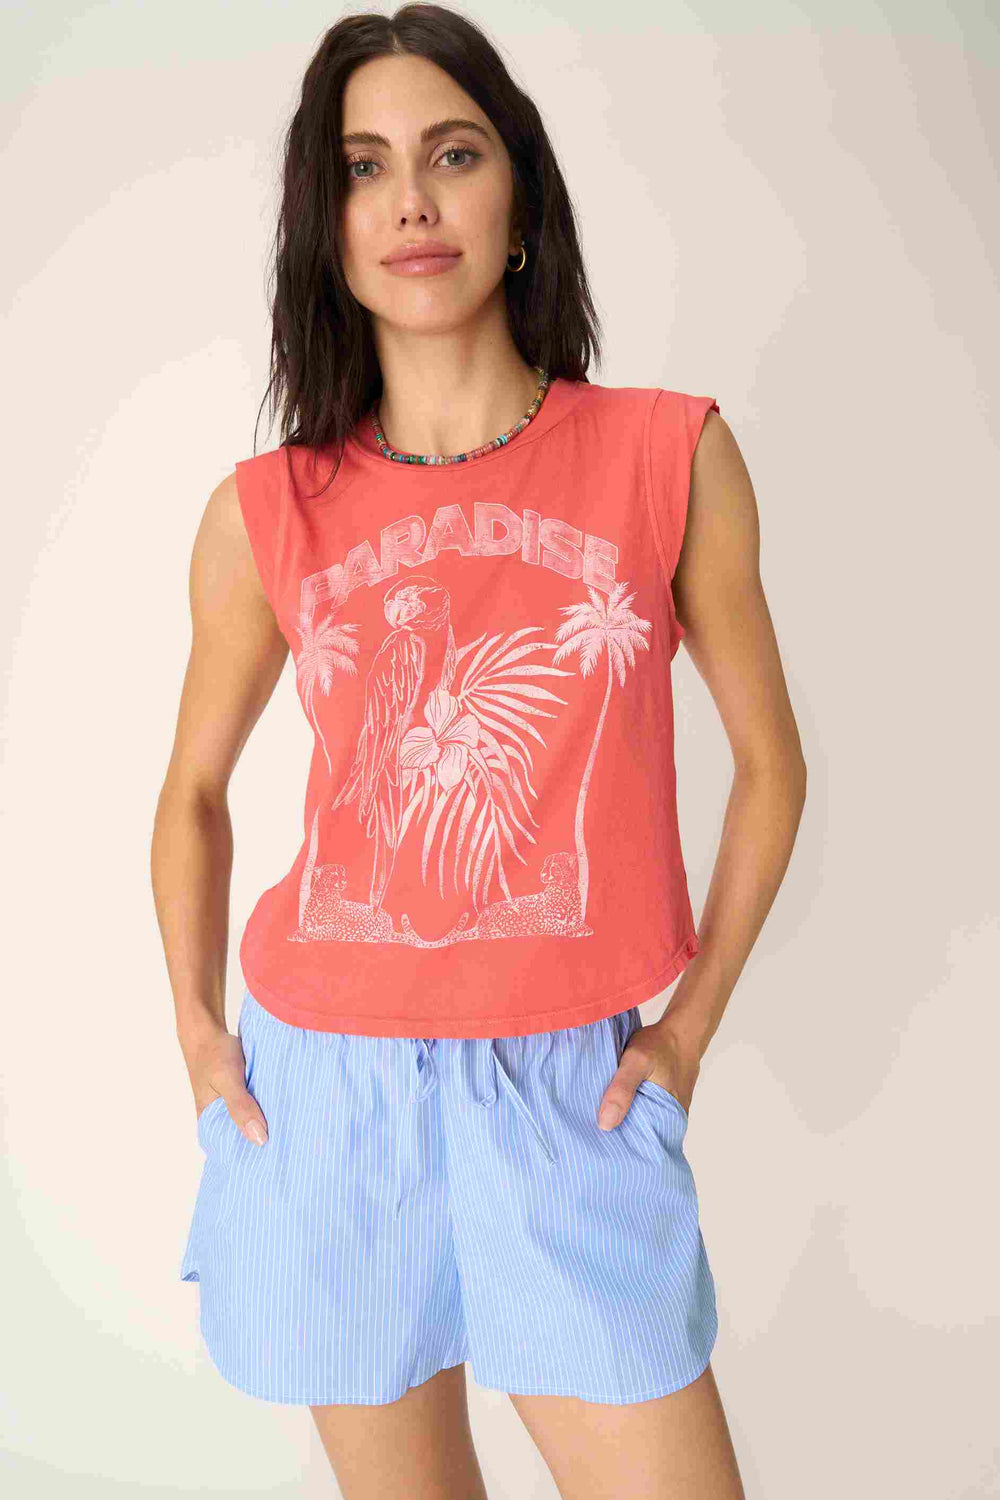 PARADISE MUSCLE TANK-SUNSET CORAL - Kingfisher Road - Online Boutique